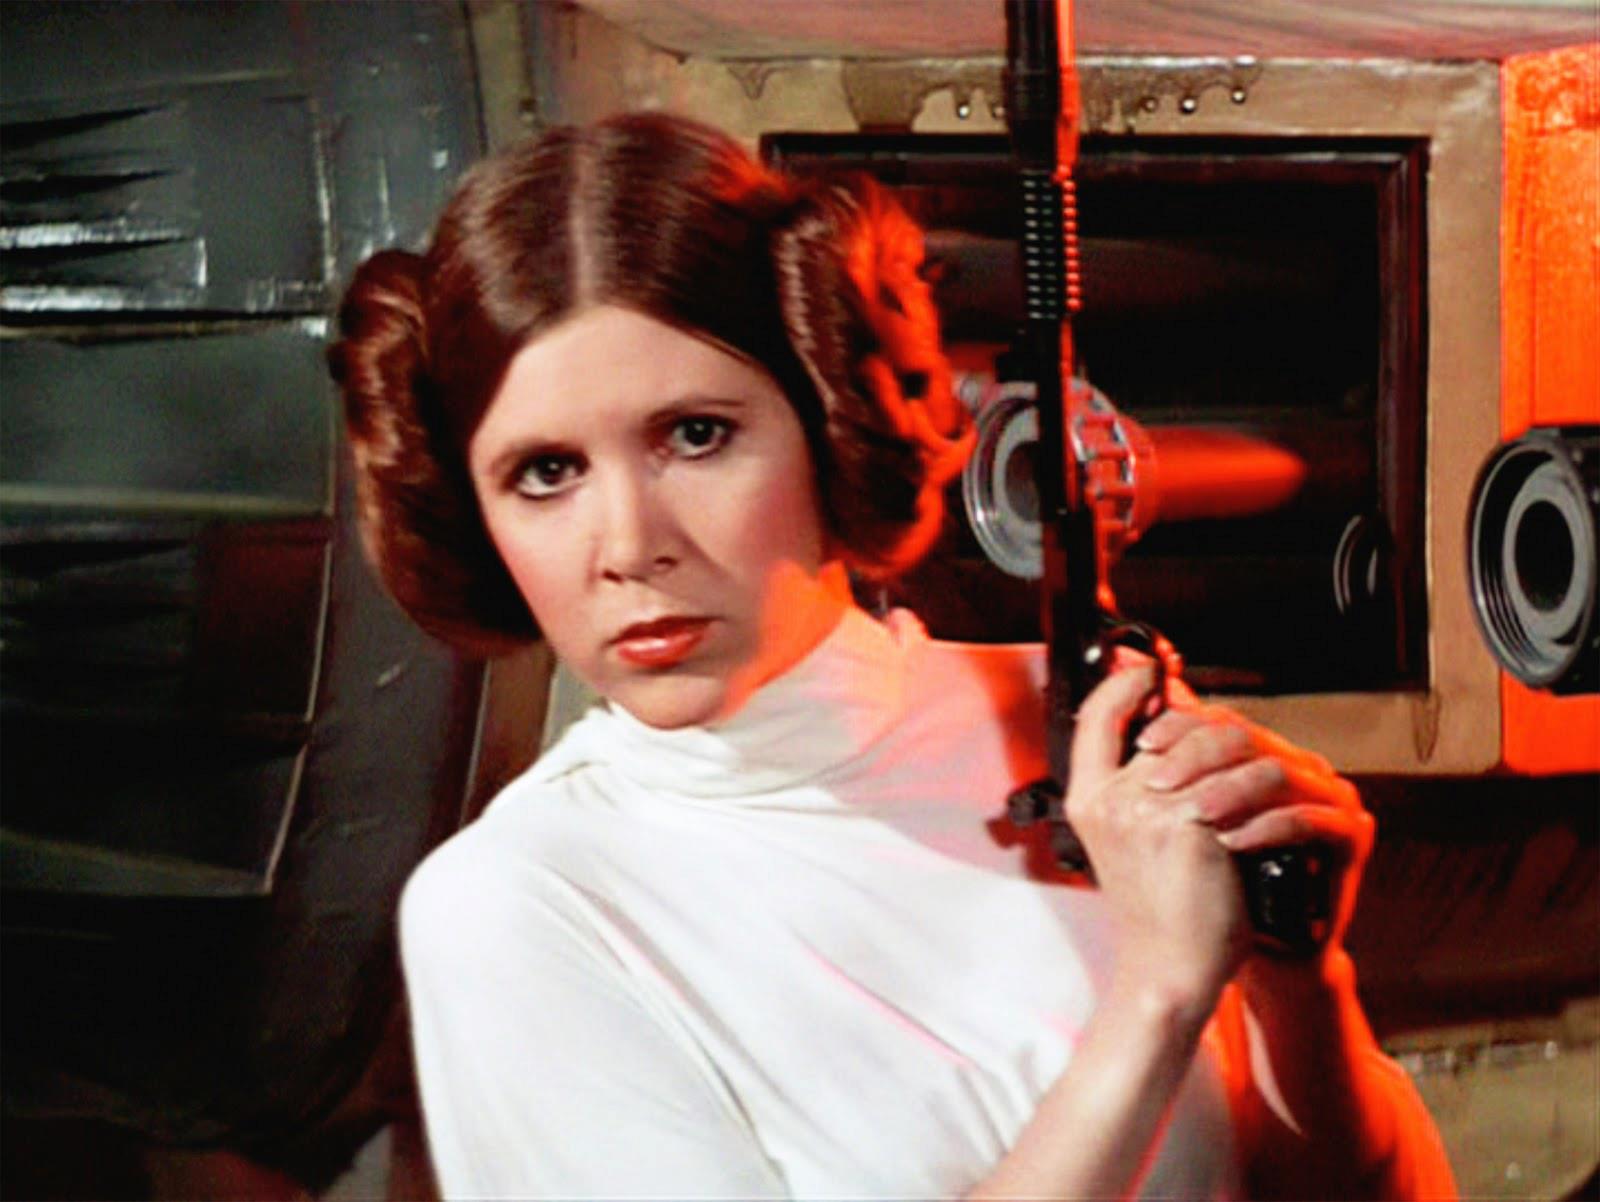 RIP Carrie!